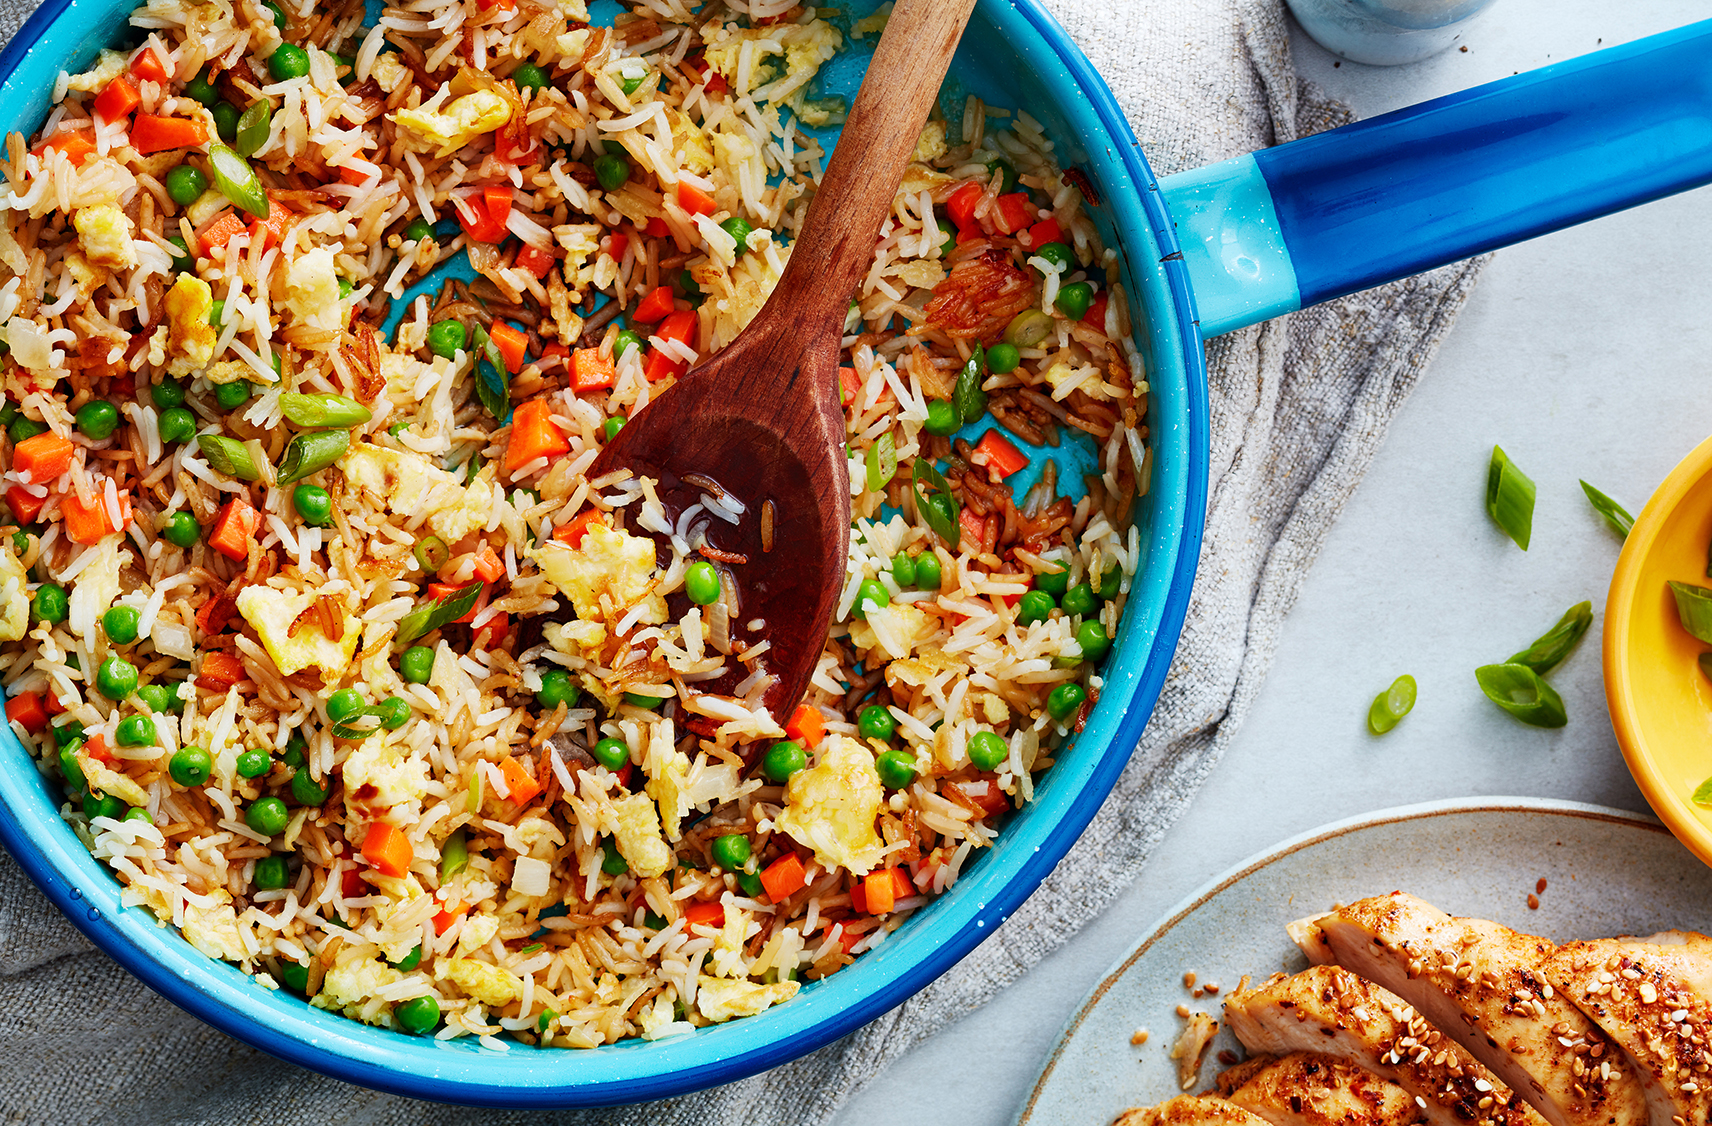 A spoon scoops up fried rice with diced carrot and peas from a blue skillet